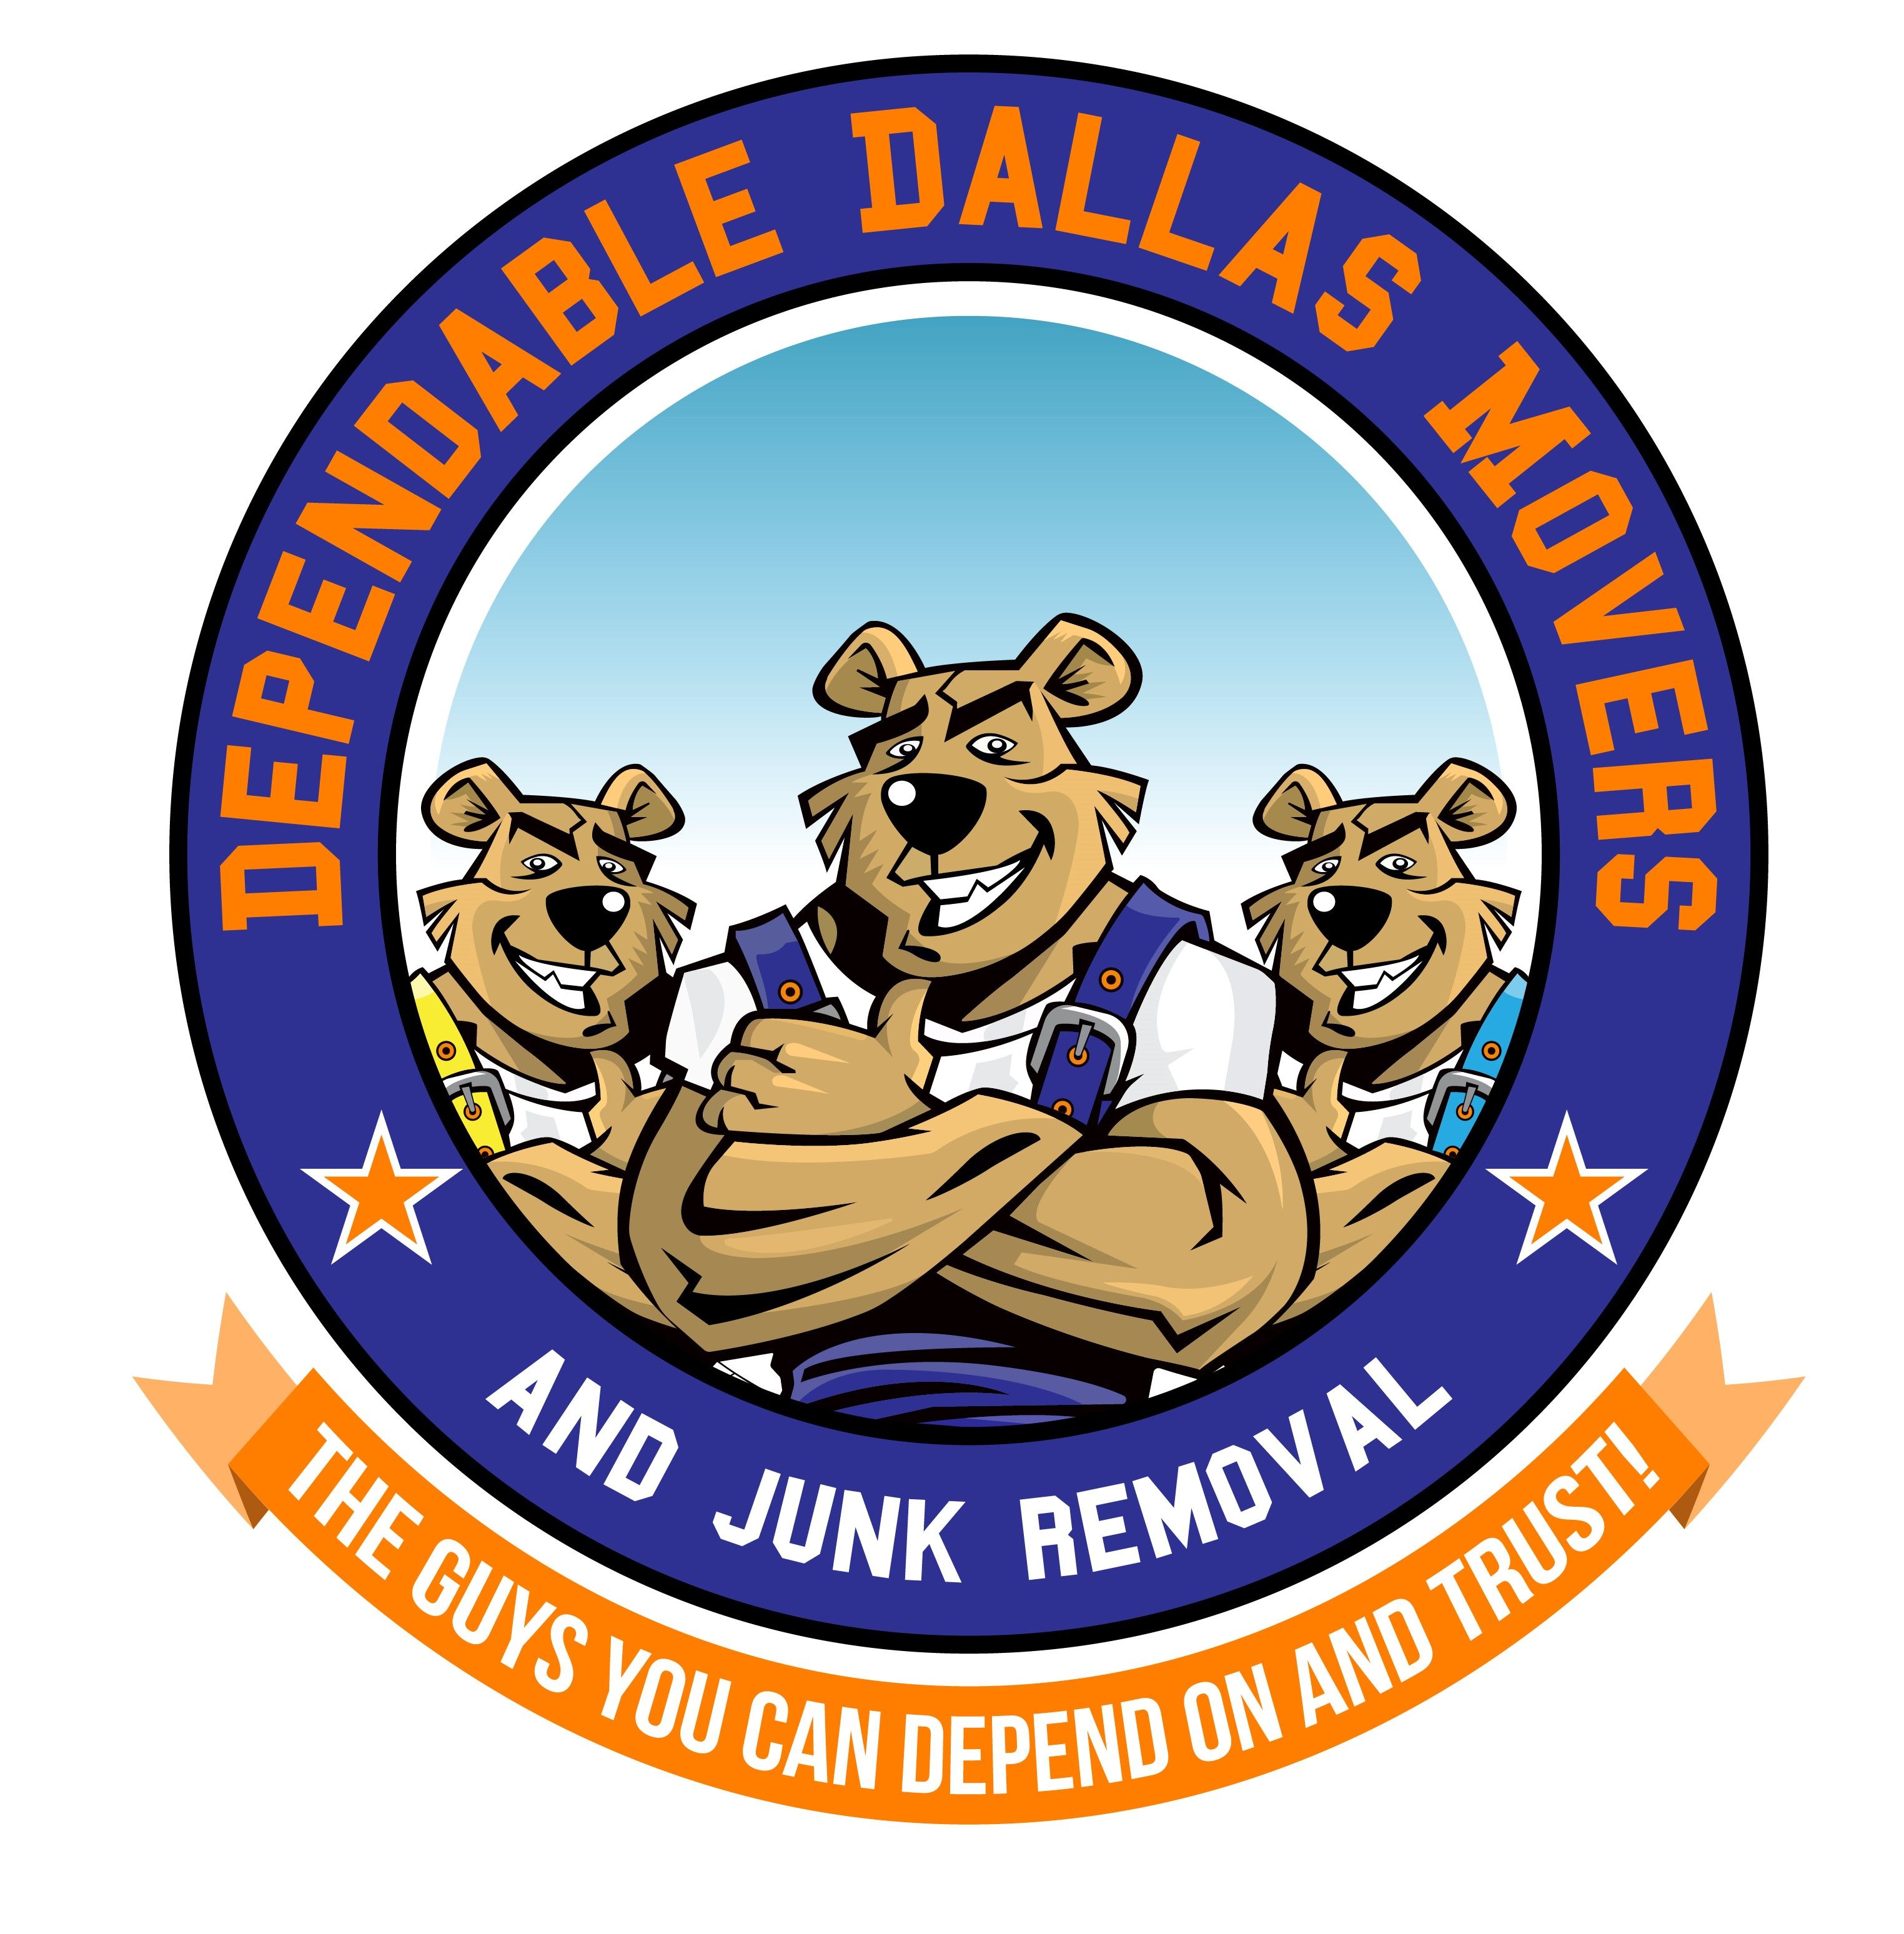 Dependable Dallas Movers and Junk Removal